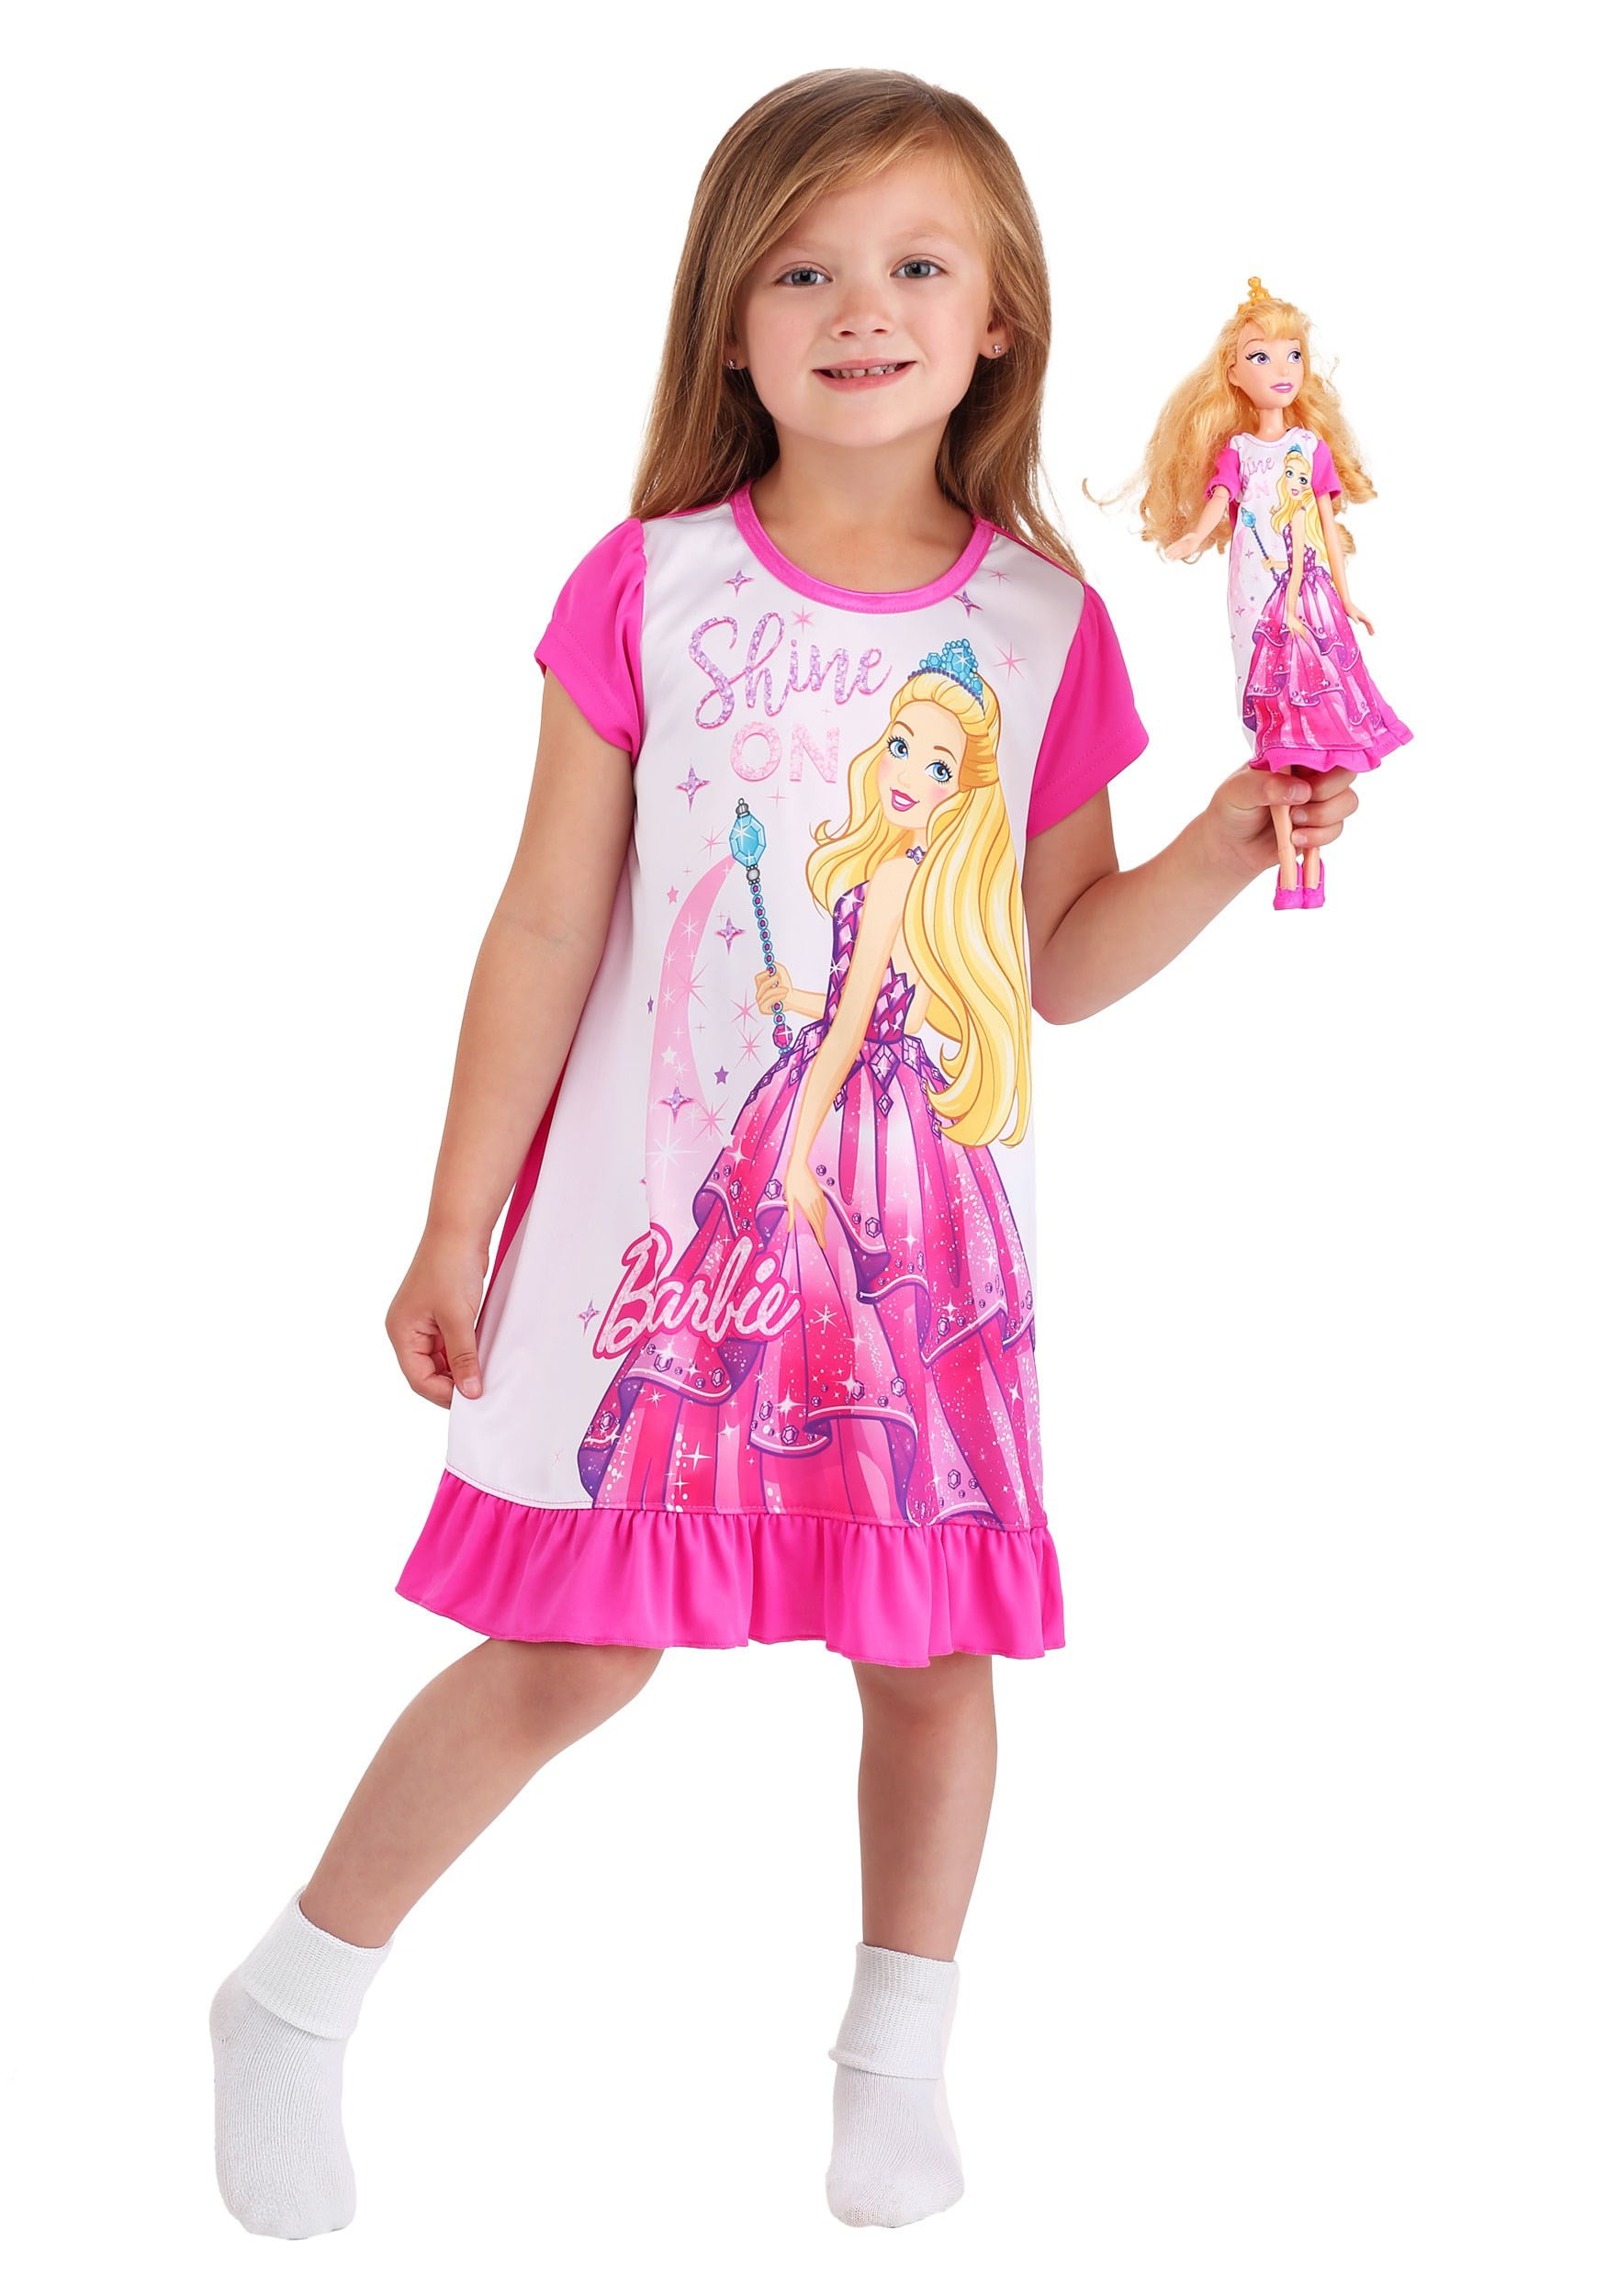 Matching 18 Inch Doll and Girl Dress Toddler Nightdress Short Flutter Sleeve Nightshirts 